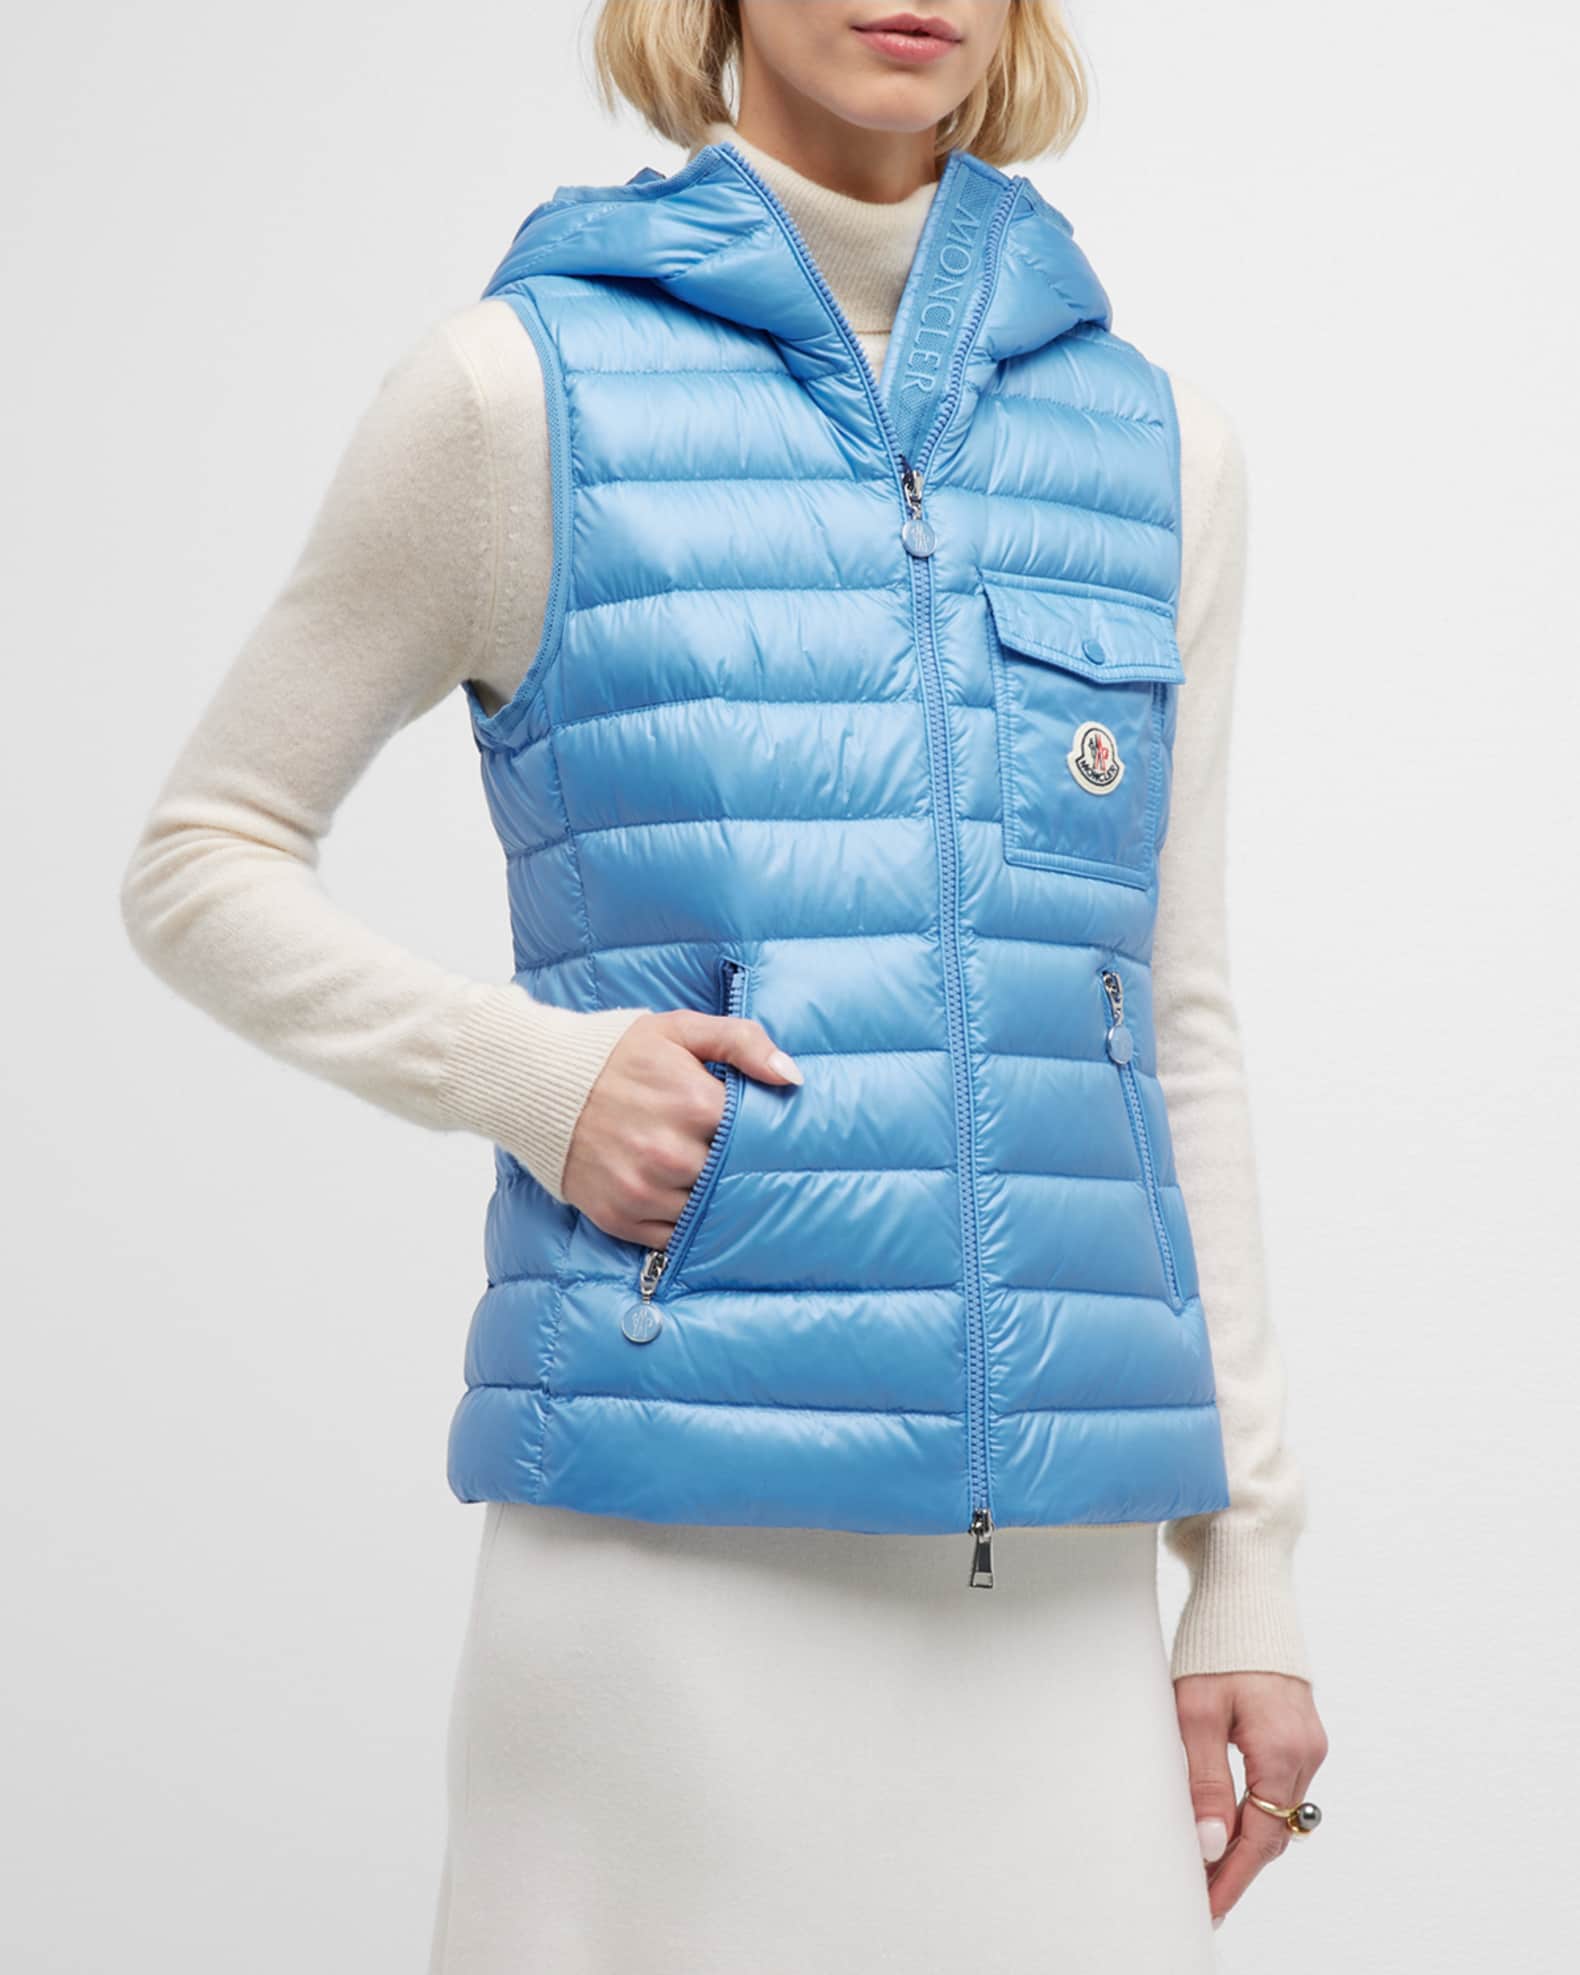 Moncler Glygos Puffer Vest w/ Hooded Collar | Neiman Marcus